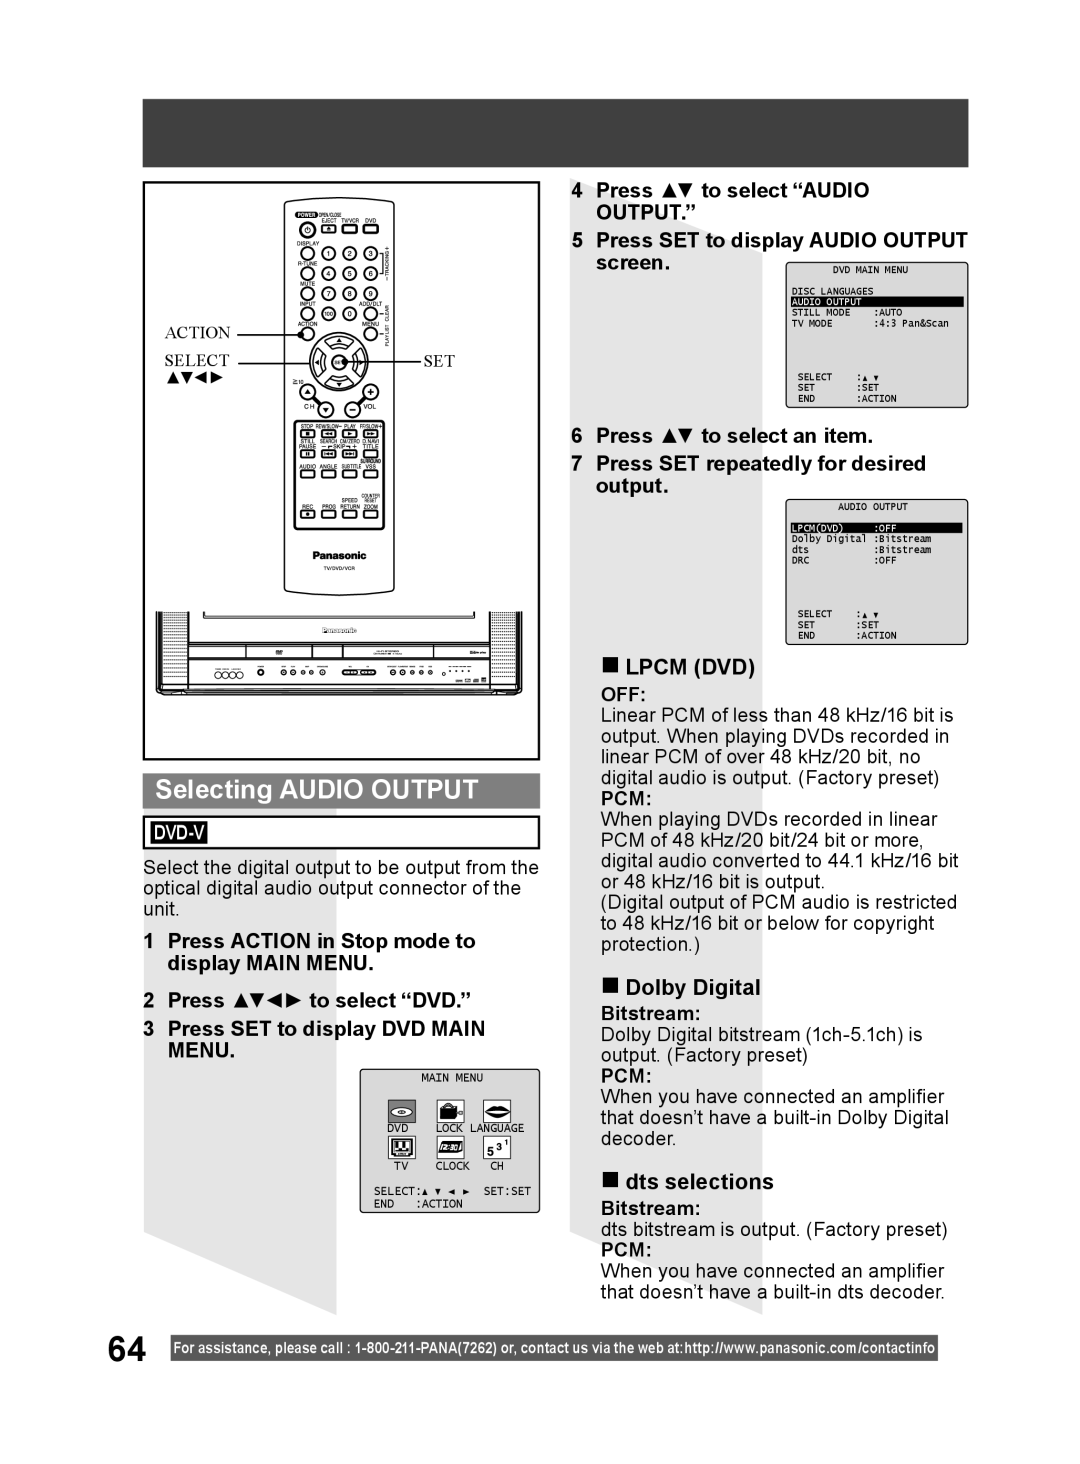 Panasonic PV DF2004 Selecting AUDIO OUTPUT, Press ACTION in Stop mode to display MAIN MENU, Lpcm Dvd, Dolby Digital, Dvd-V 